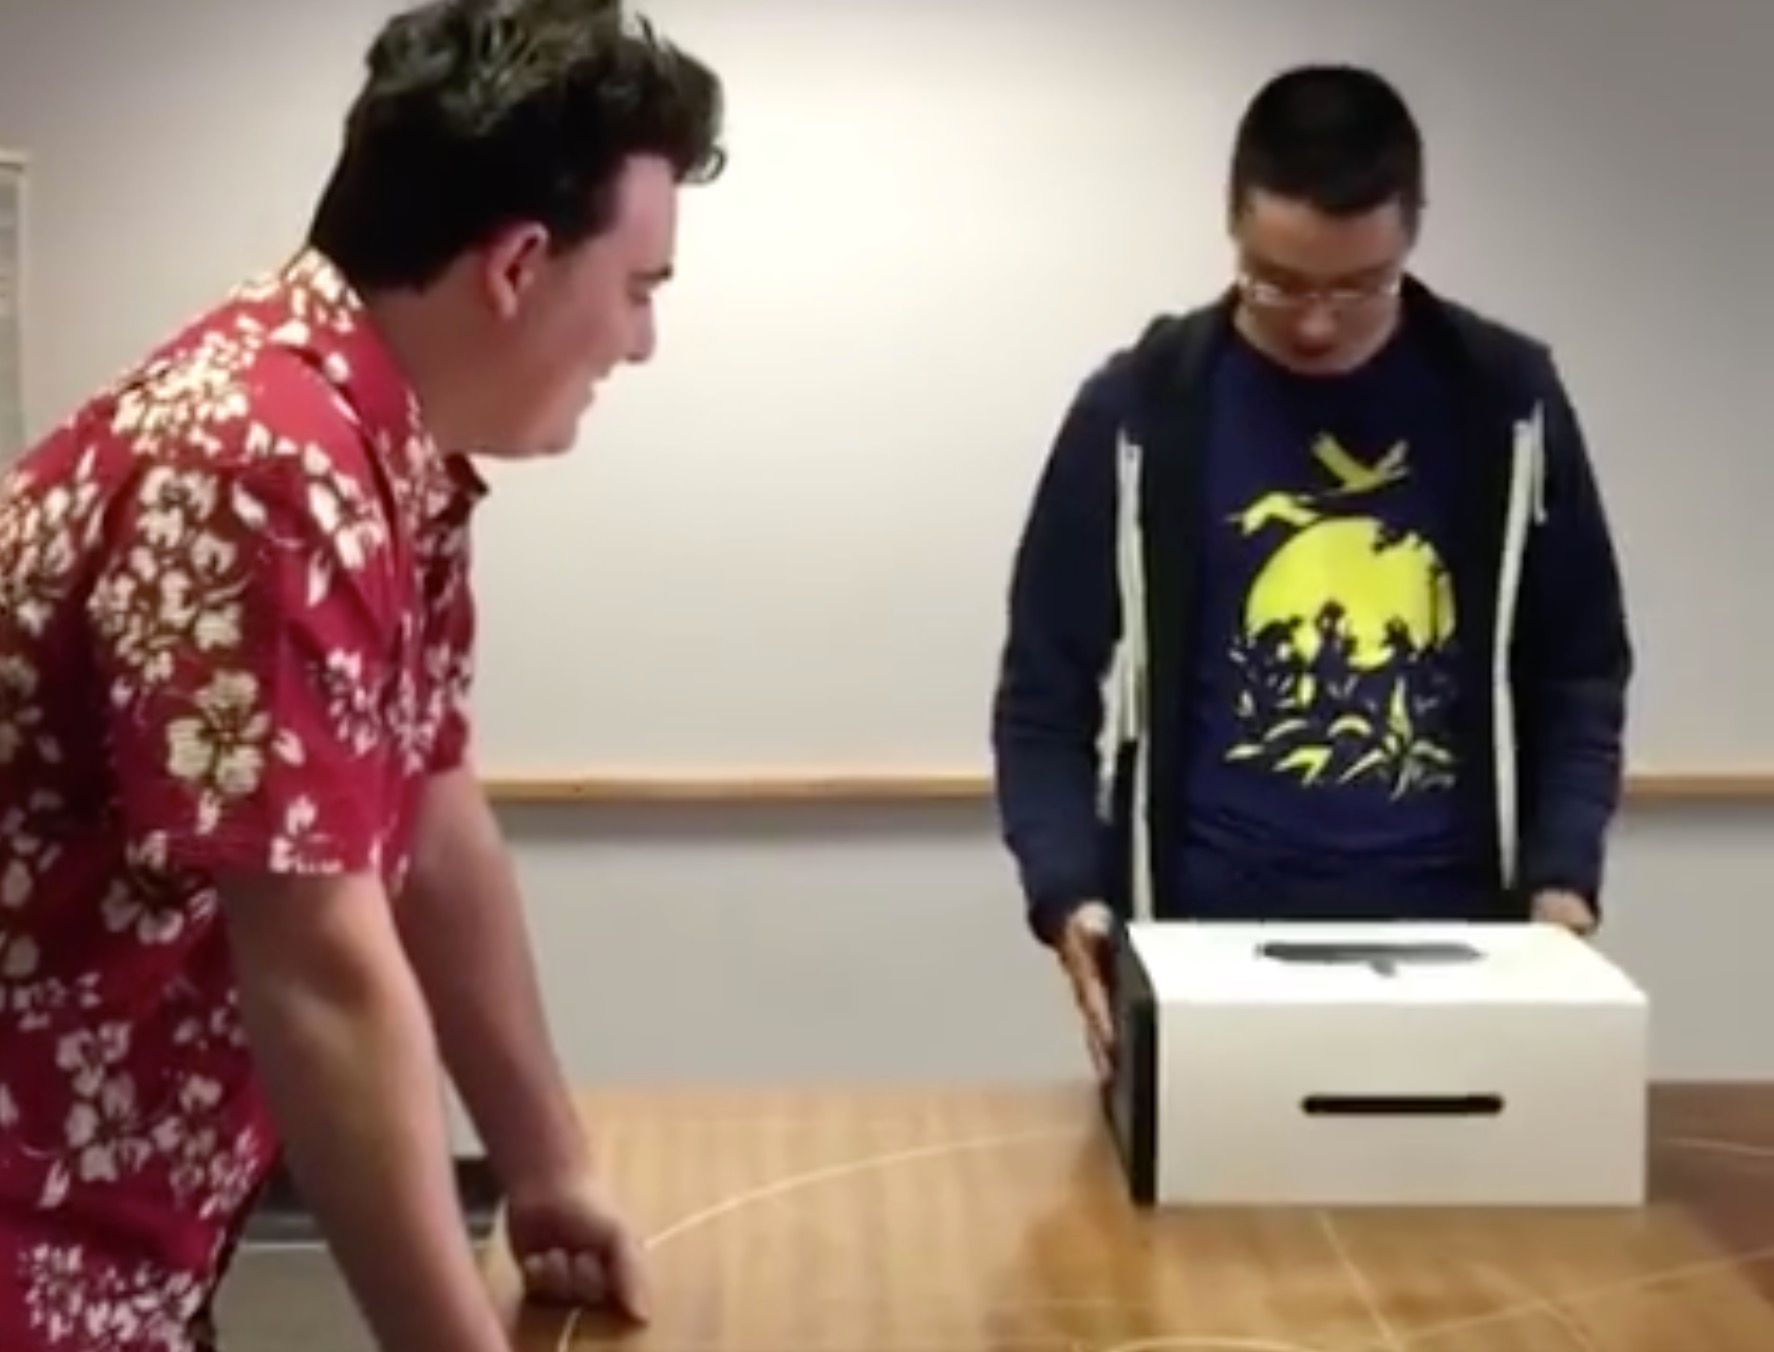 watch oculus vr s founder deliver the first rift to a developer in alaska image 1